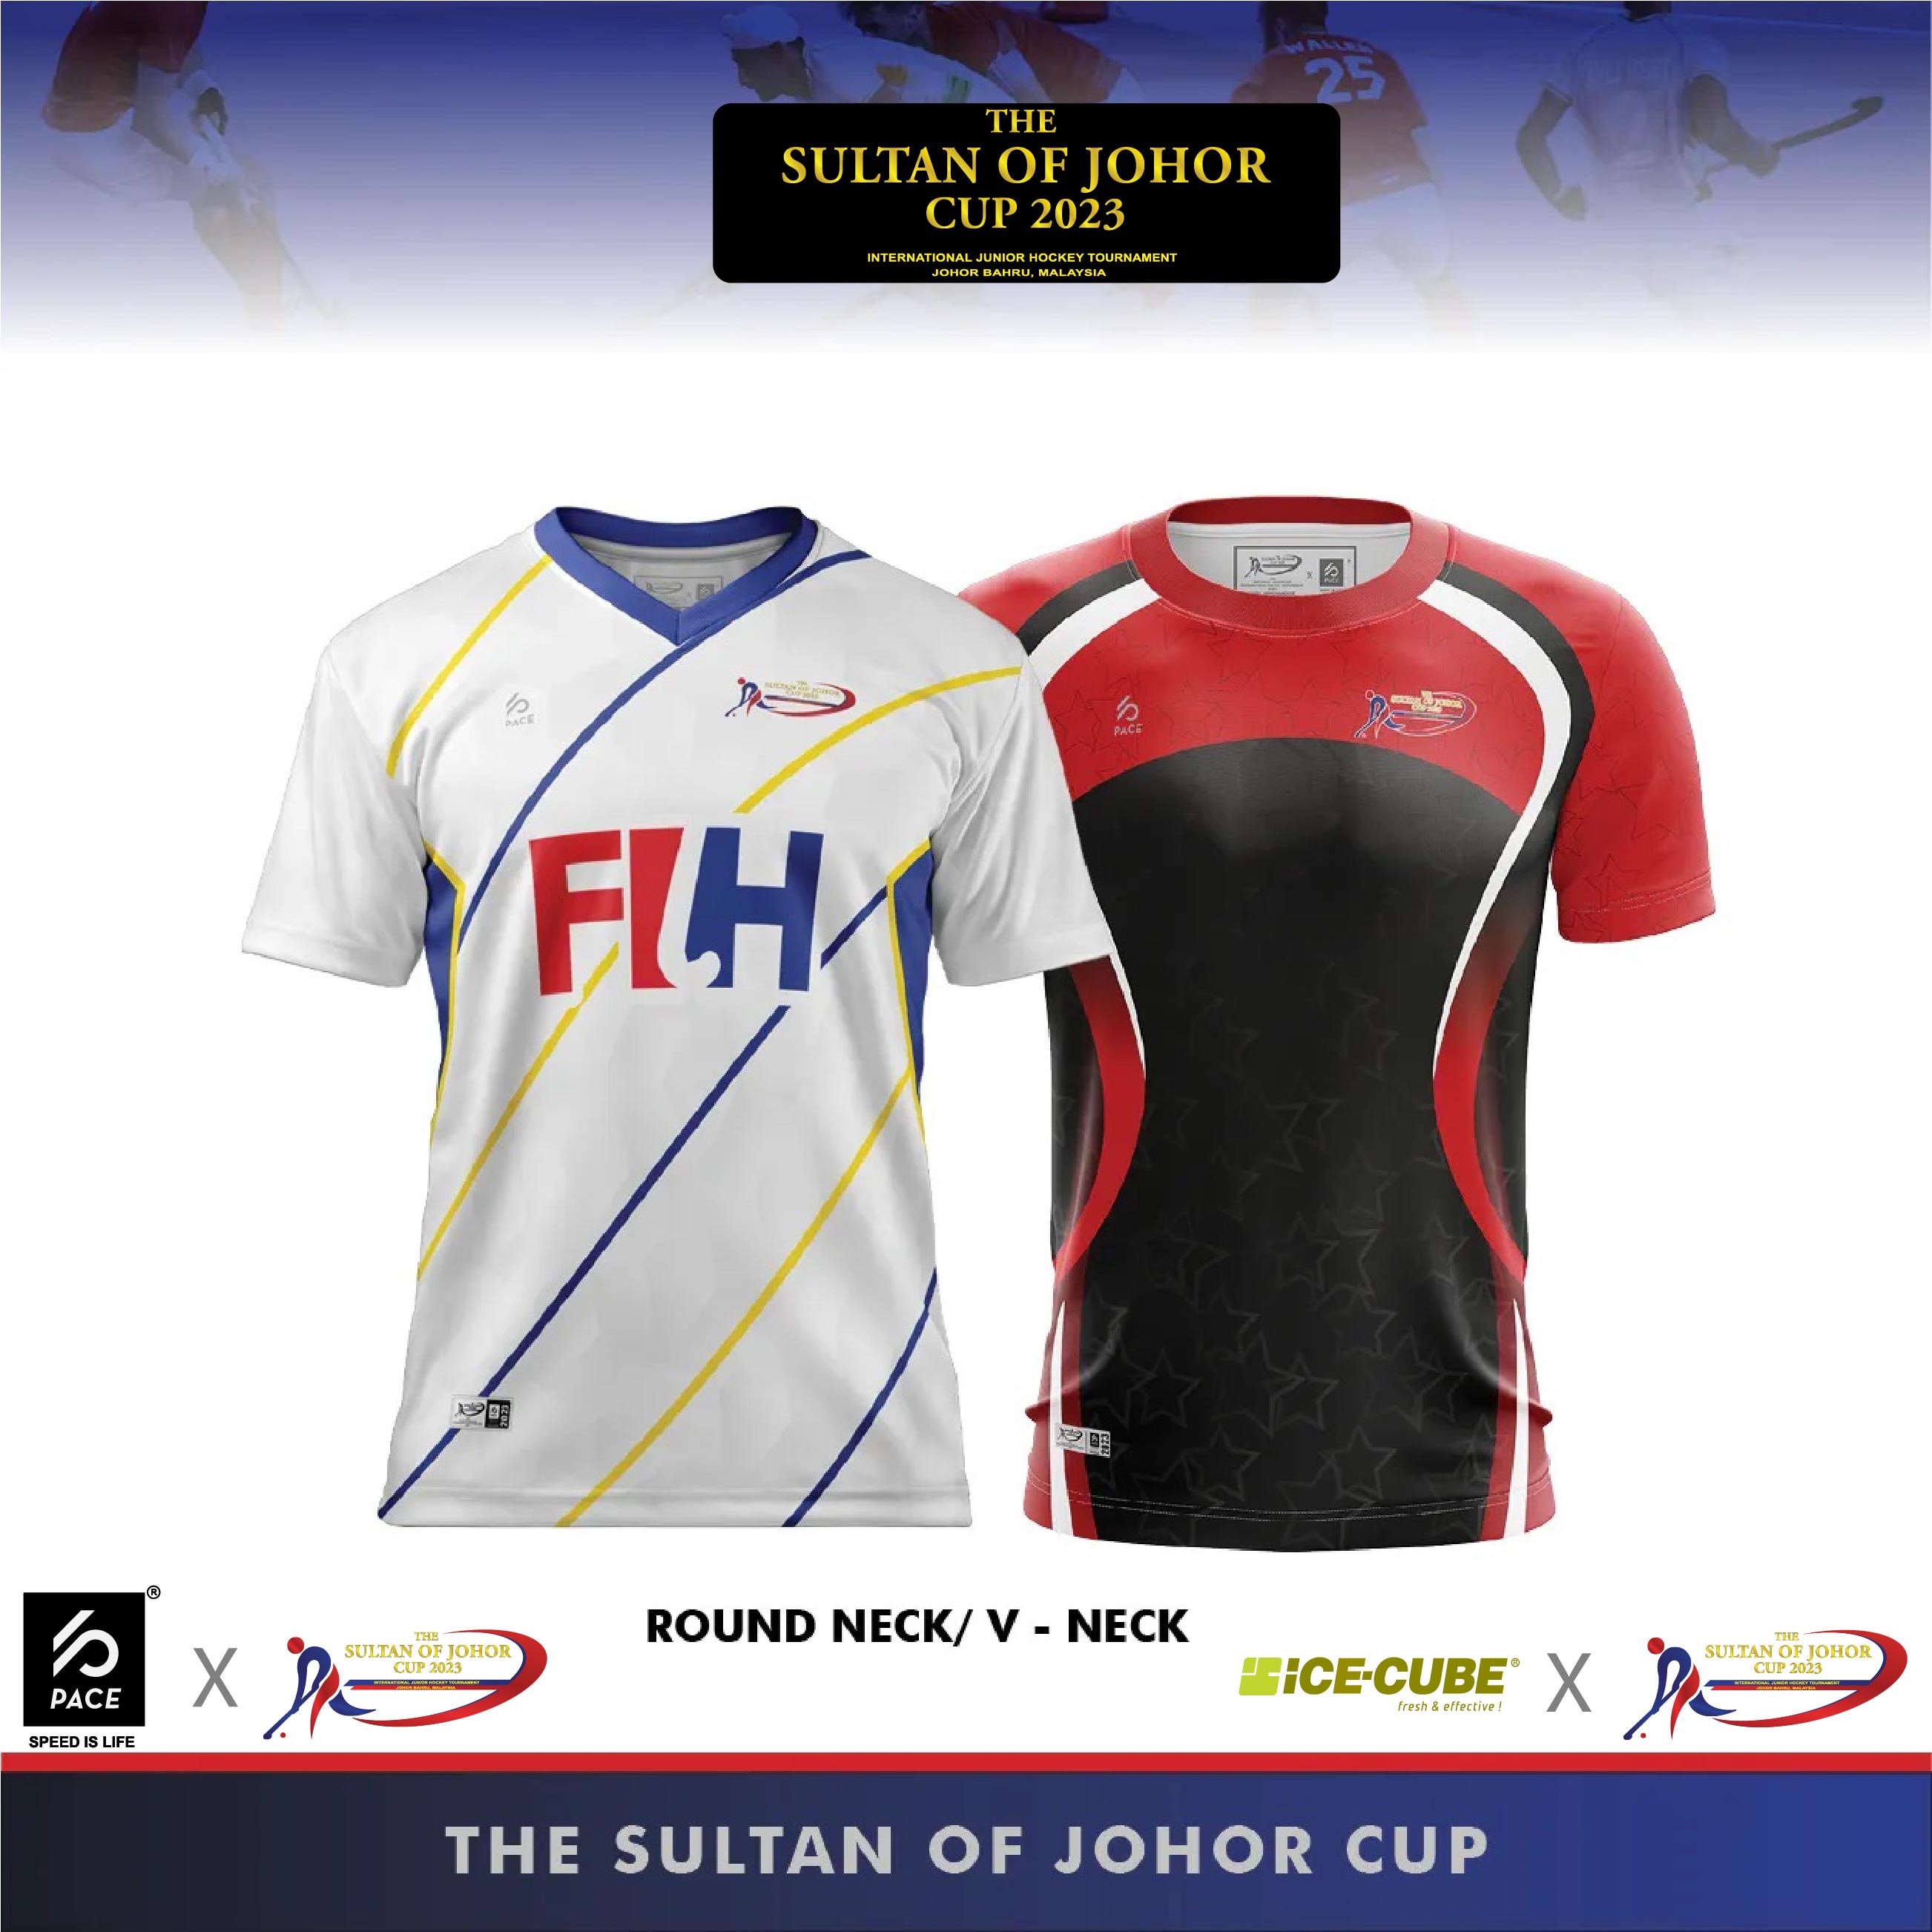 THE SULTAN OF JOHOR CUP - ROUND NECK/ V - NECK